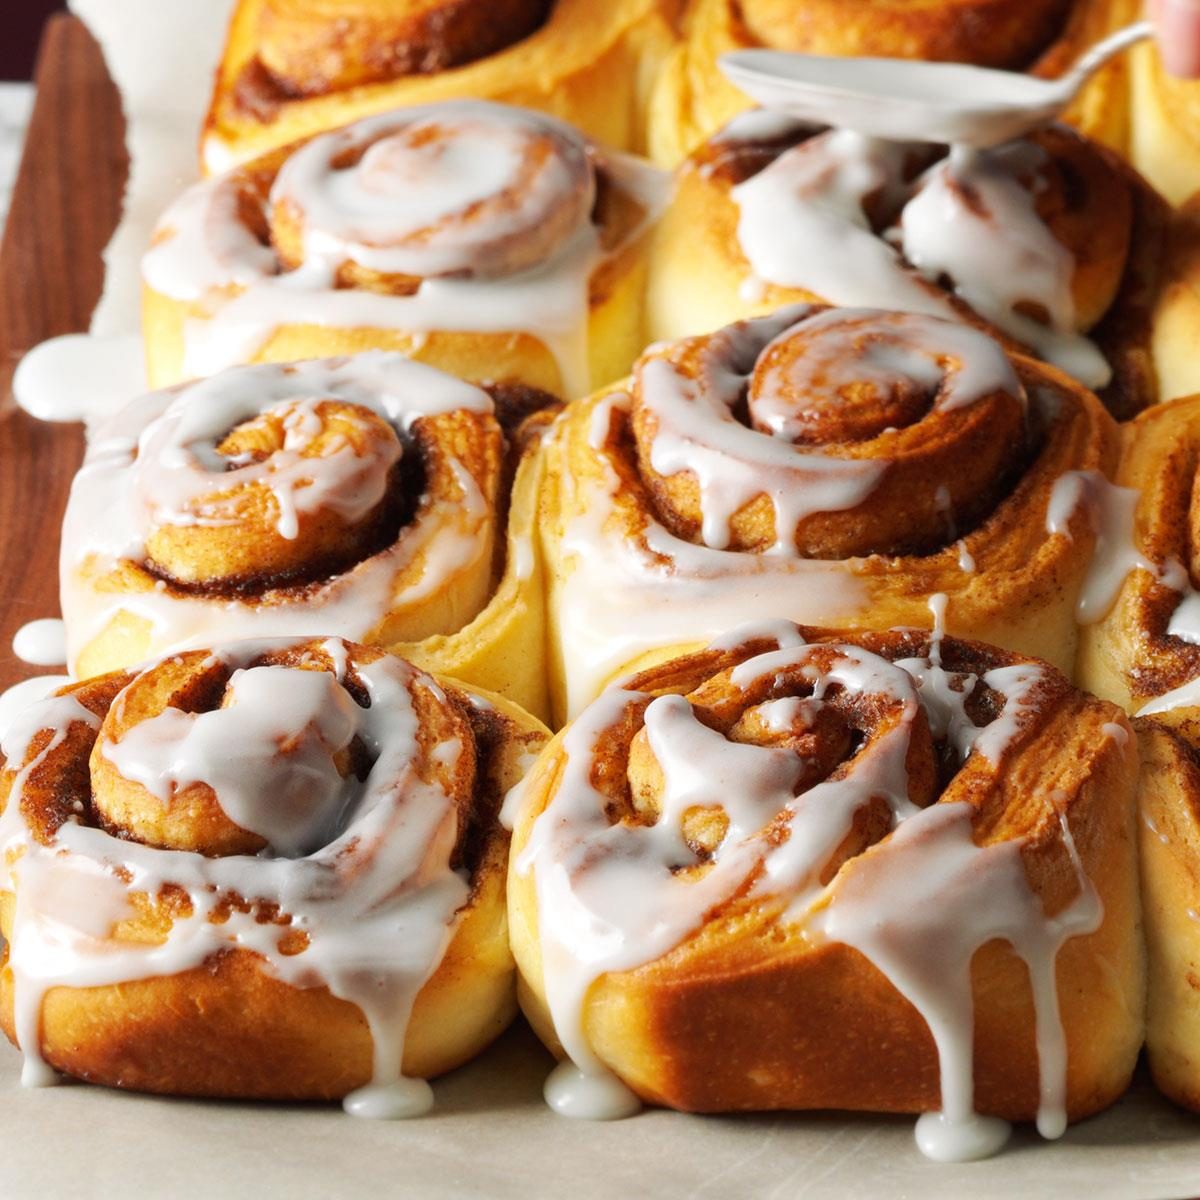 Do you guys consider cinnamon rolls as a breakfast food? Why or why not ...